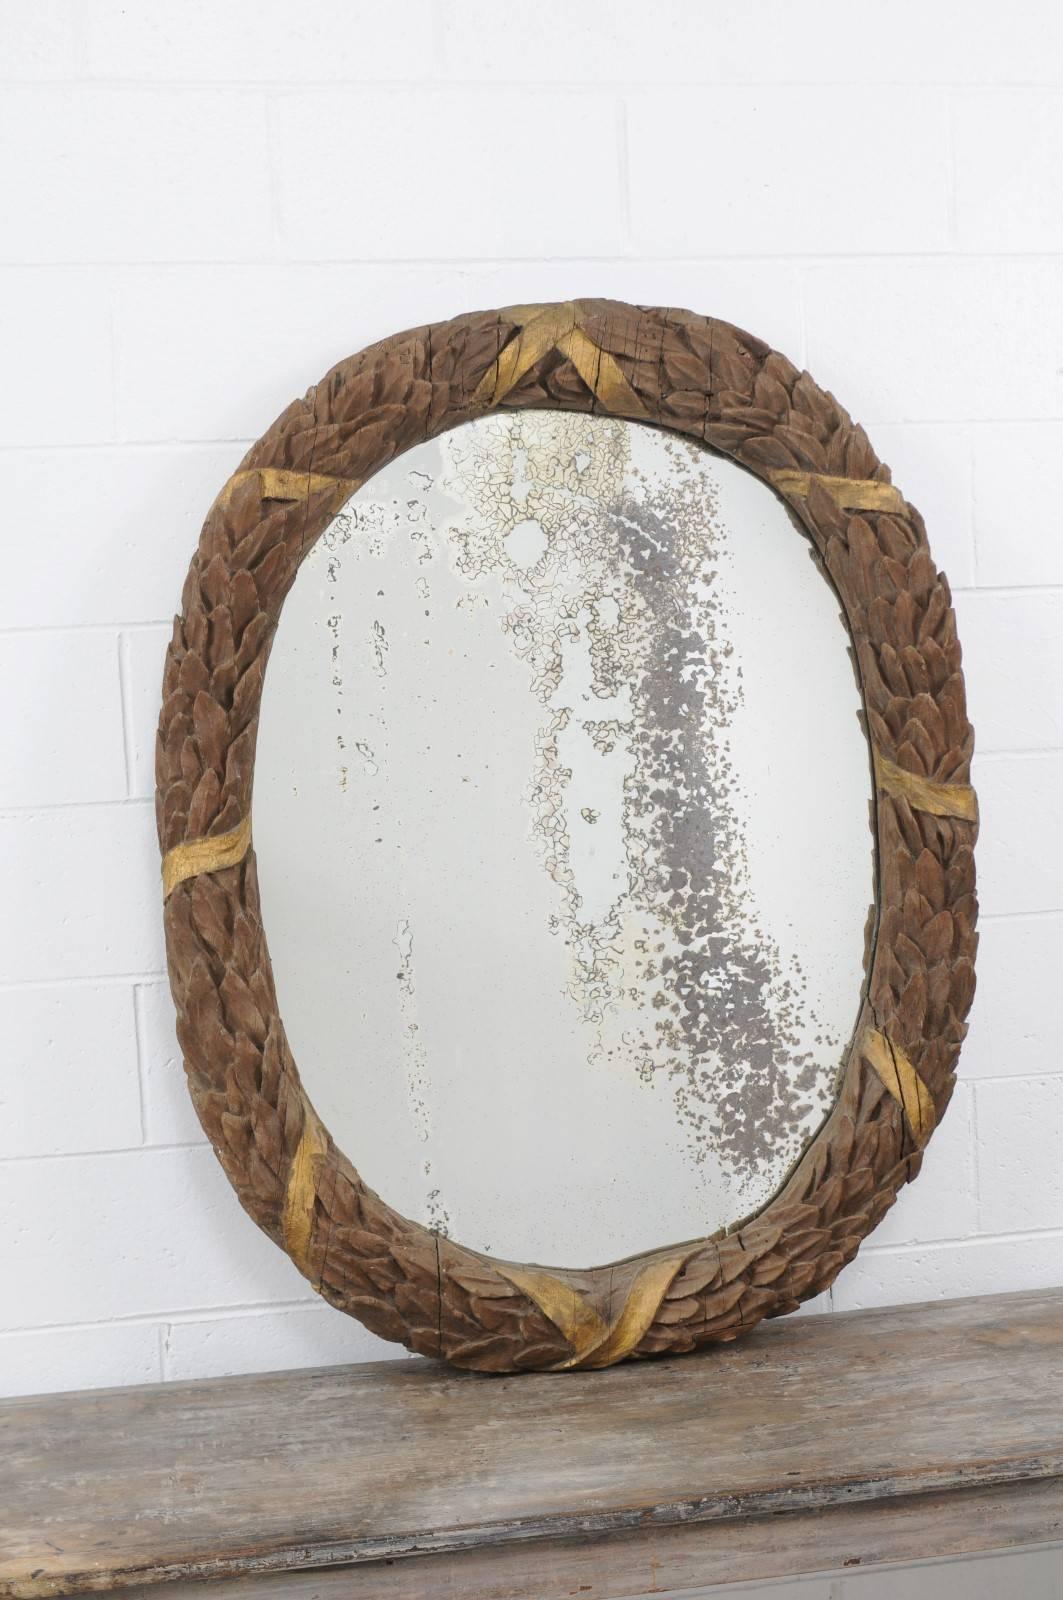 A neoclassical style French oval carved oak mirror with ribbon-tied wreath motif from the late 19th century. This French carved oak mirror features an exquisite oval frame, adorned with a parcel-gilt ribbon-tied wreath, surrounding a nicely aged